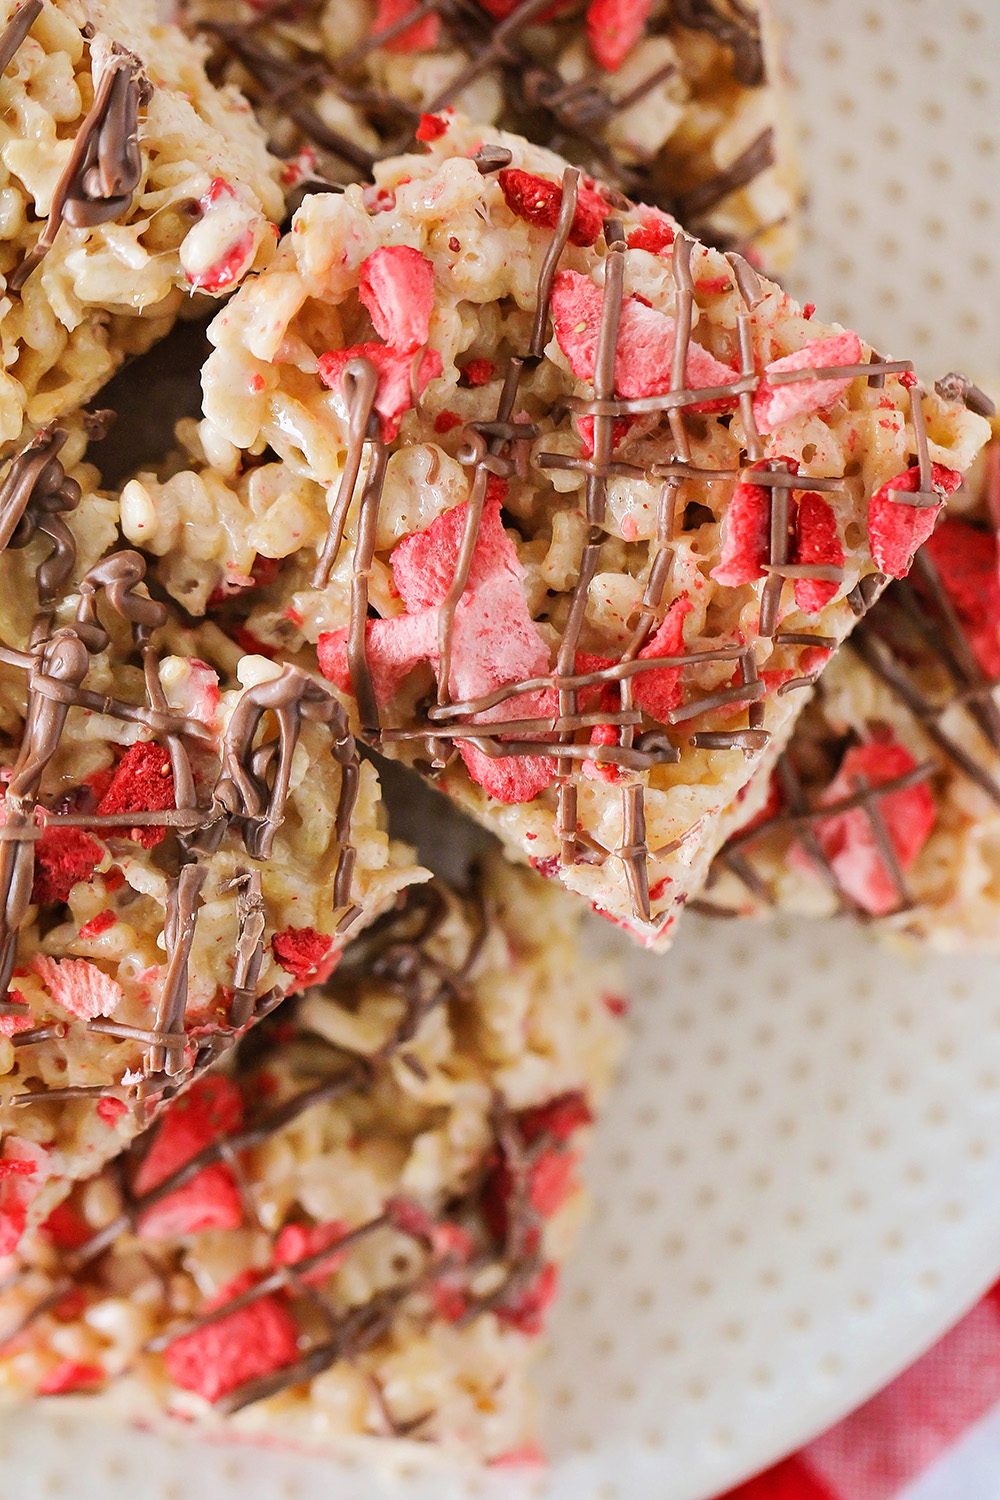 These strawberry chocolate rice krispy treats are loaded with sweet strawberry flavor and a touch of chocolate, for an amazingly delicious treat!